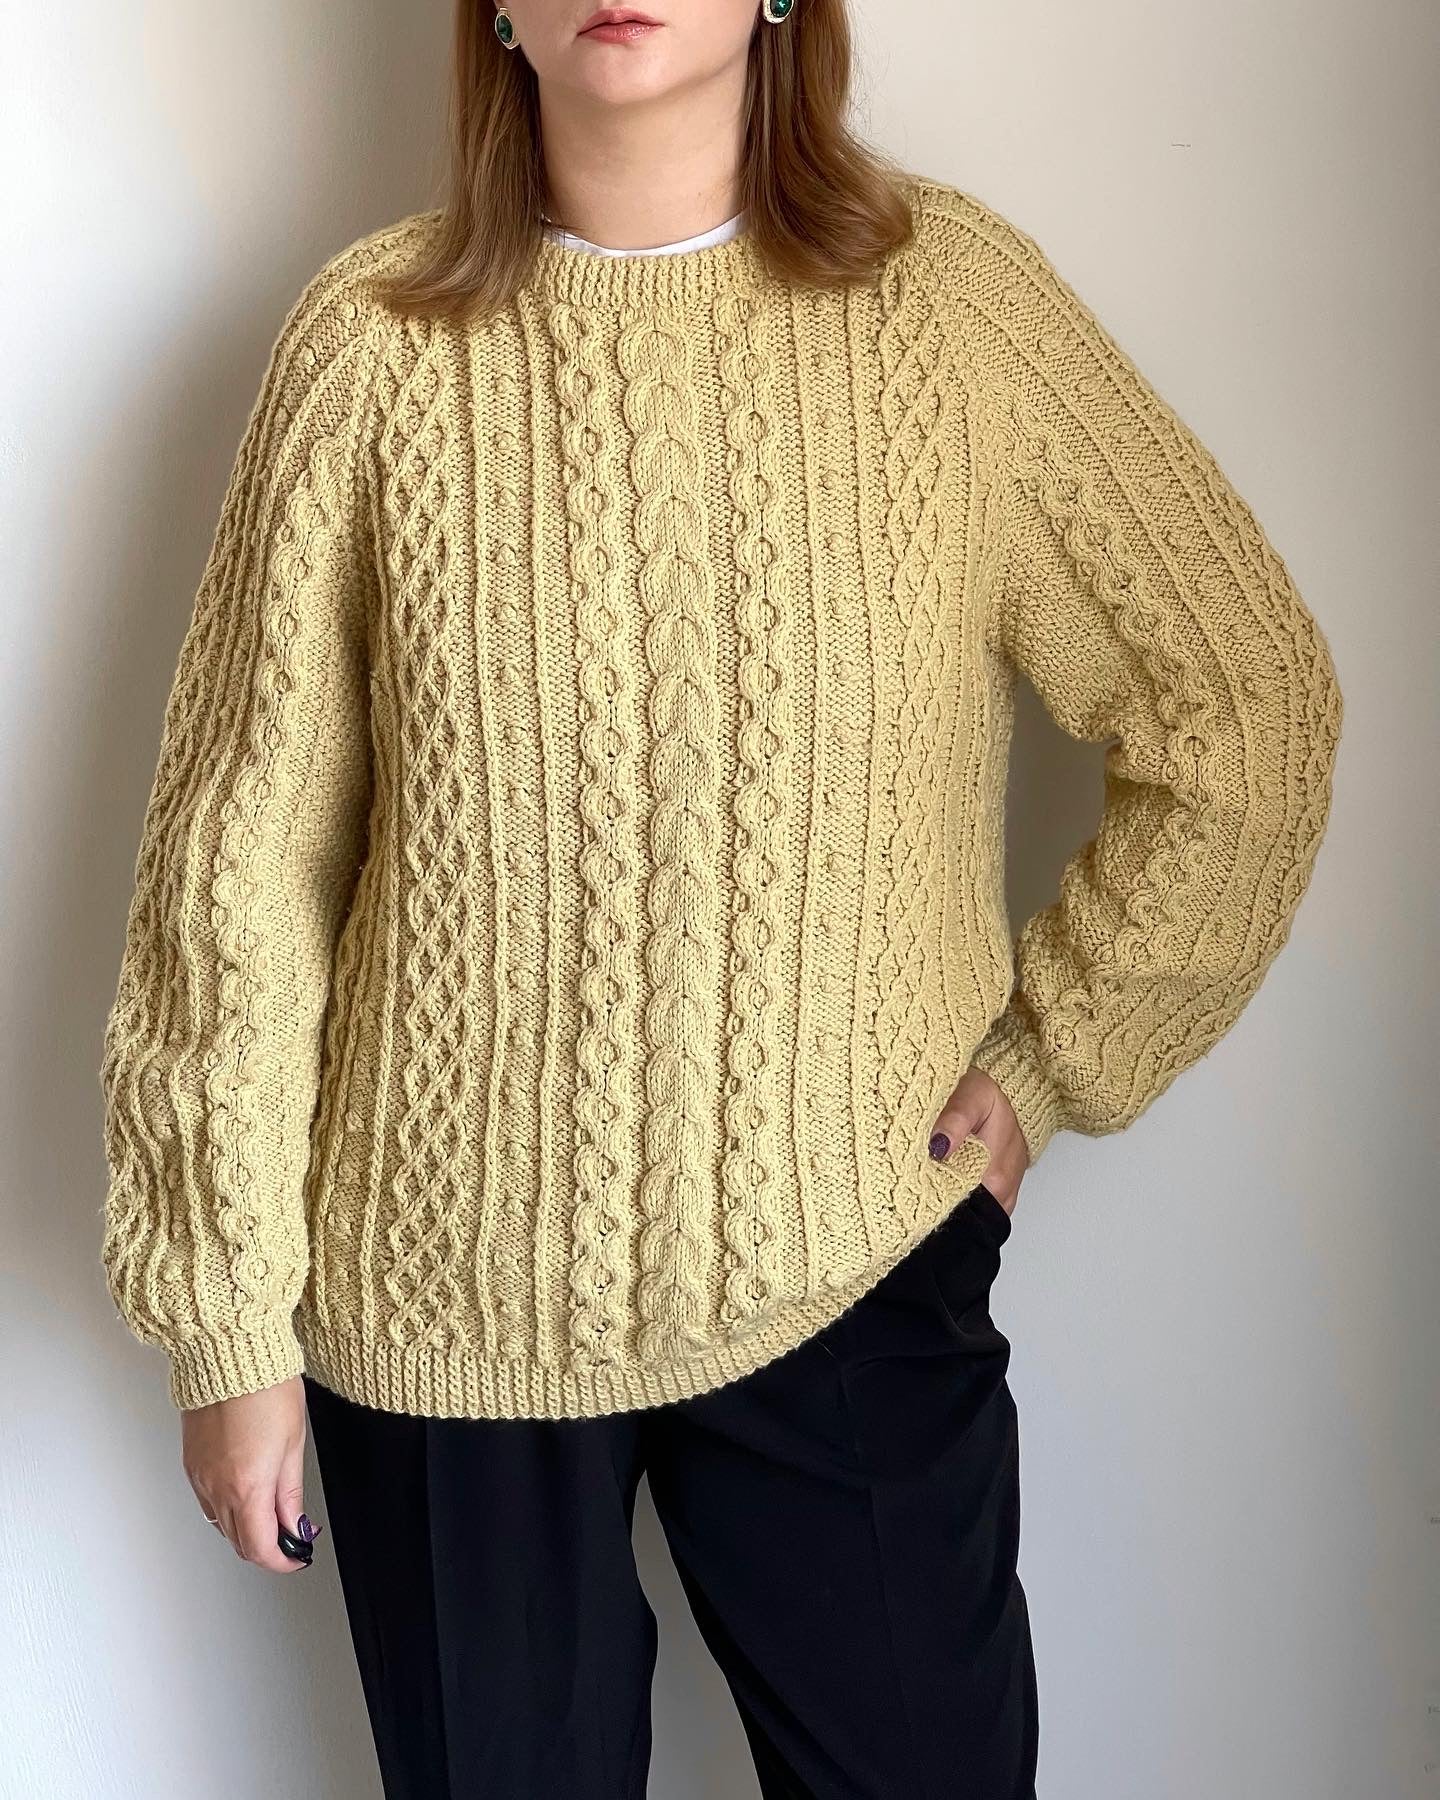 Vintage cable knit handmade woollen sweater